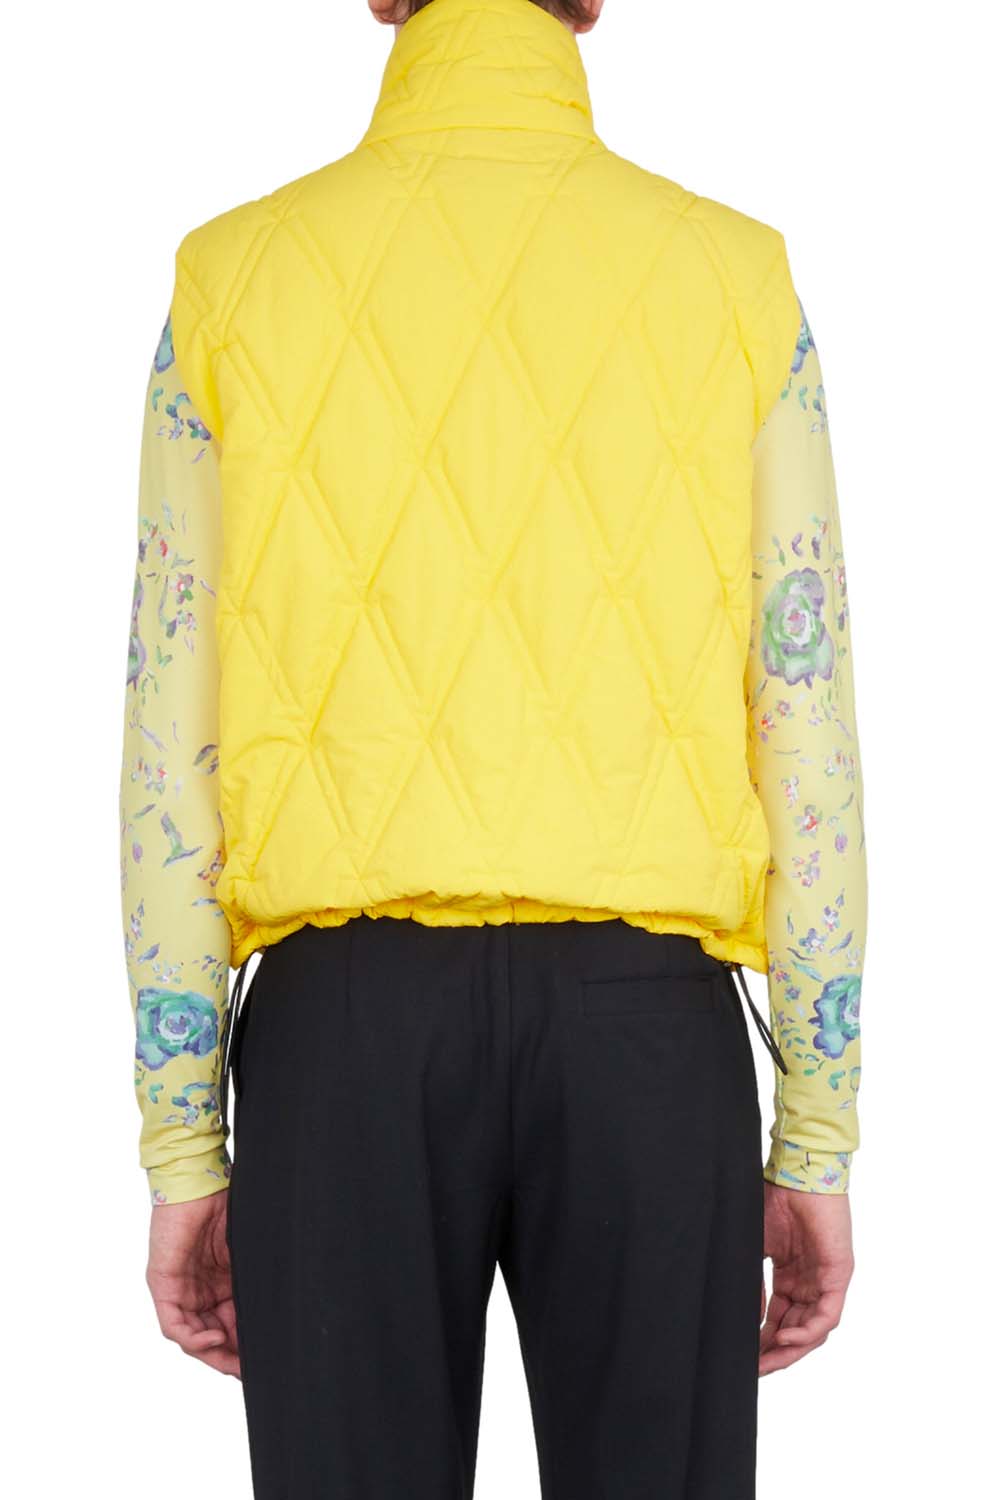 Valette Studio - The Quilted Vest: Yellow